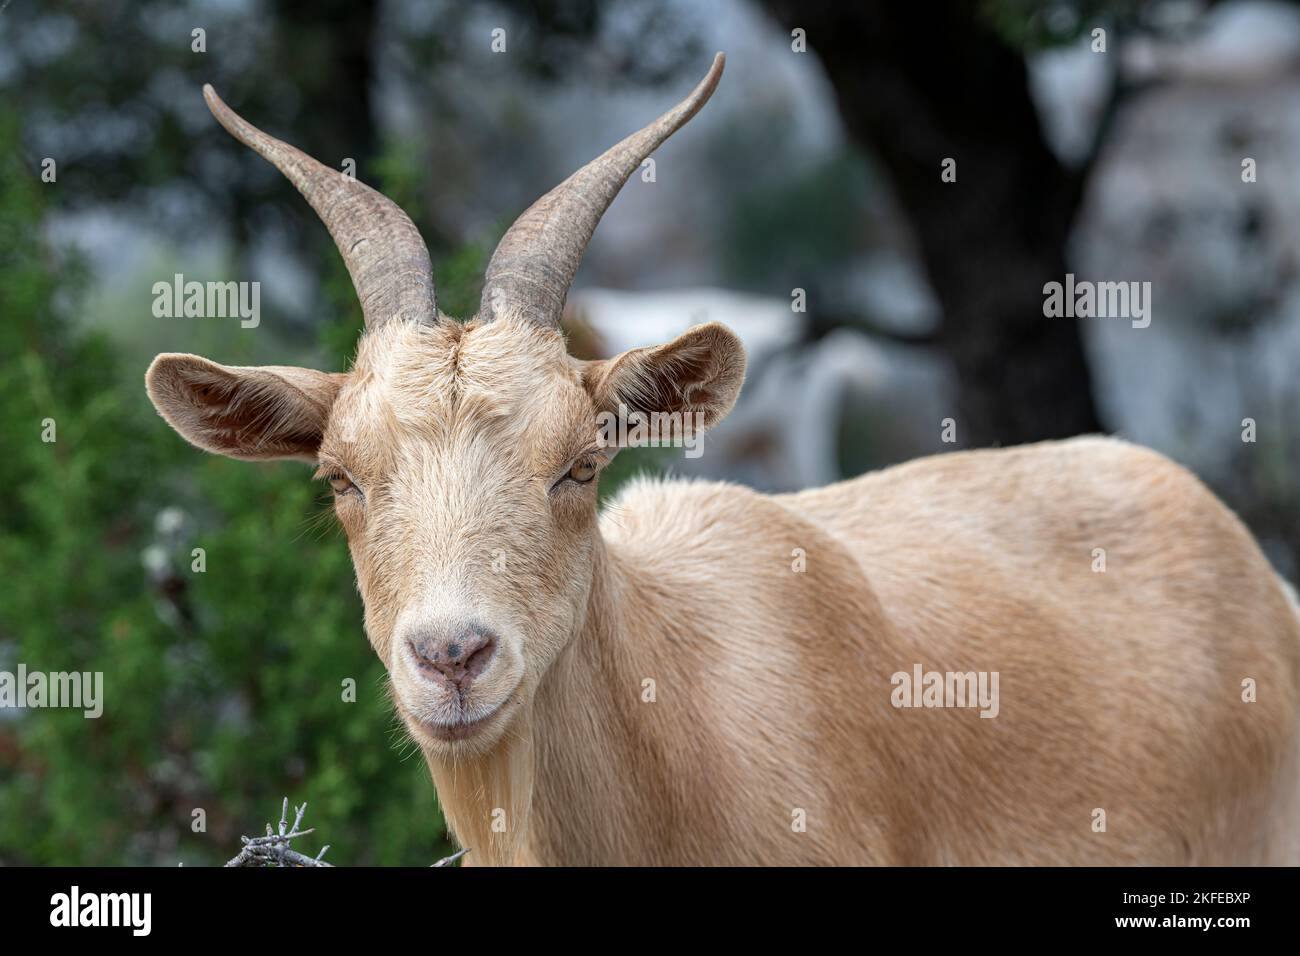 Isolated Brown Goat portrait looking at the camera Stock Photo